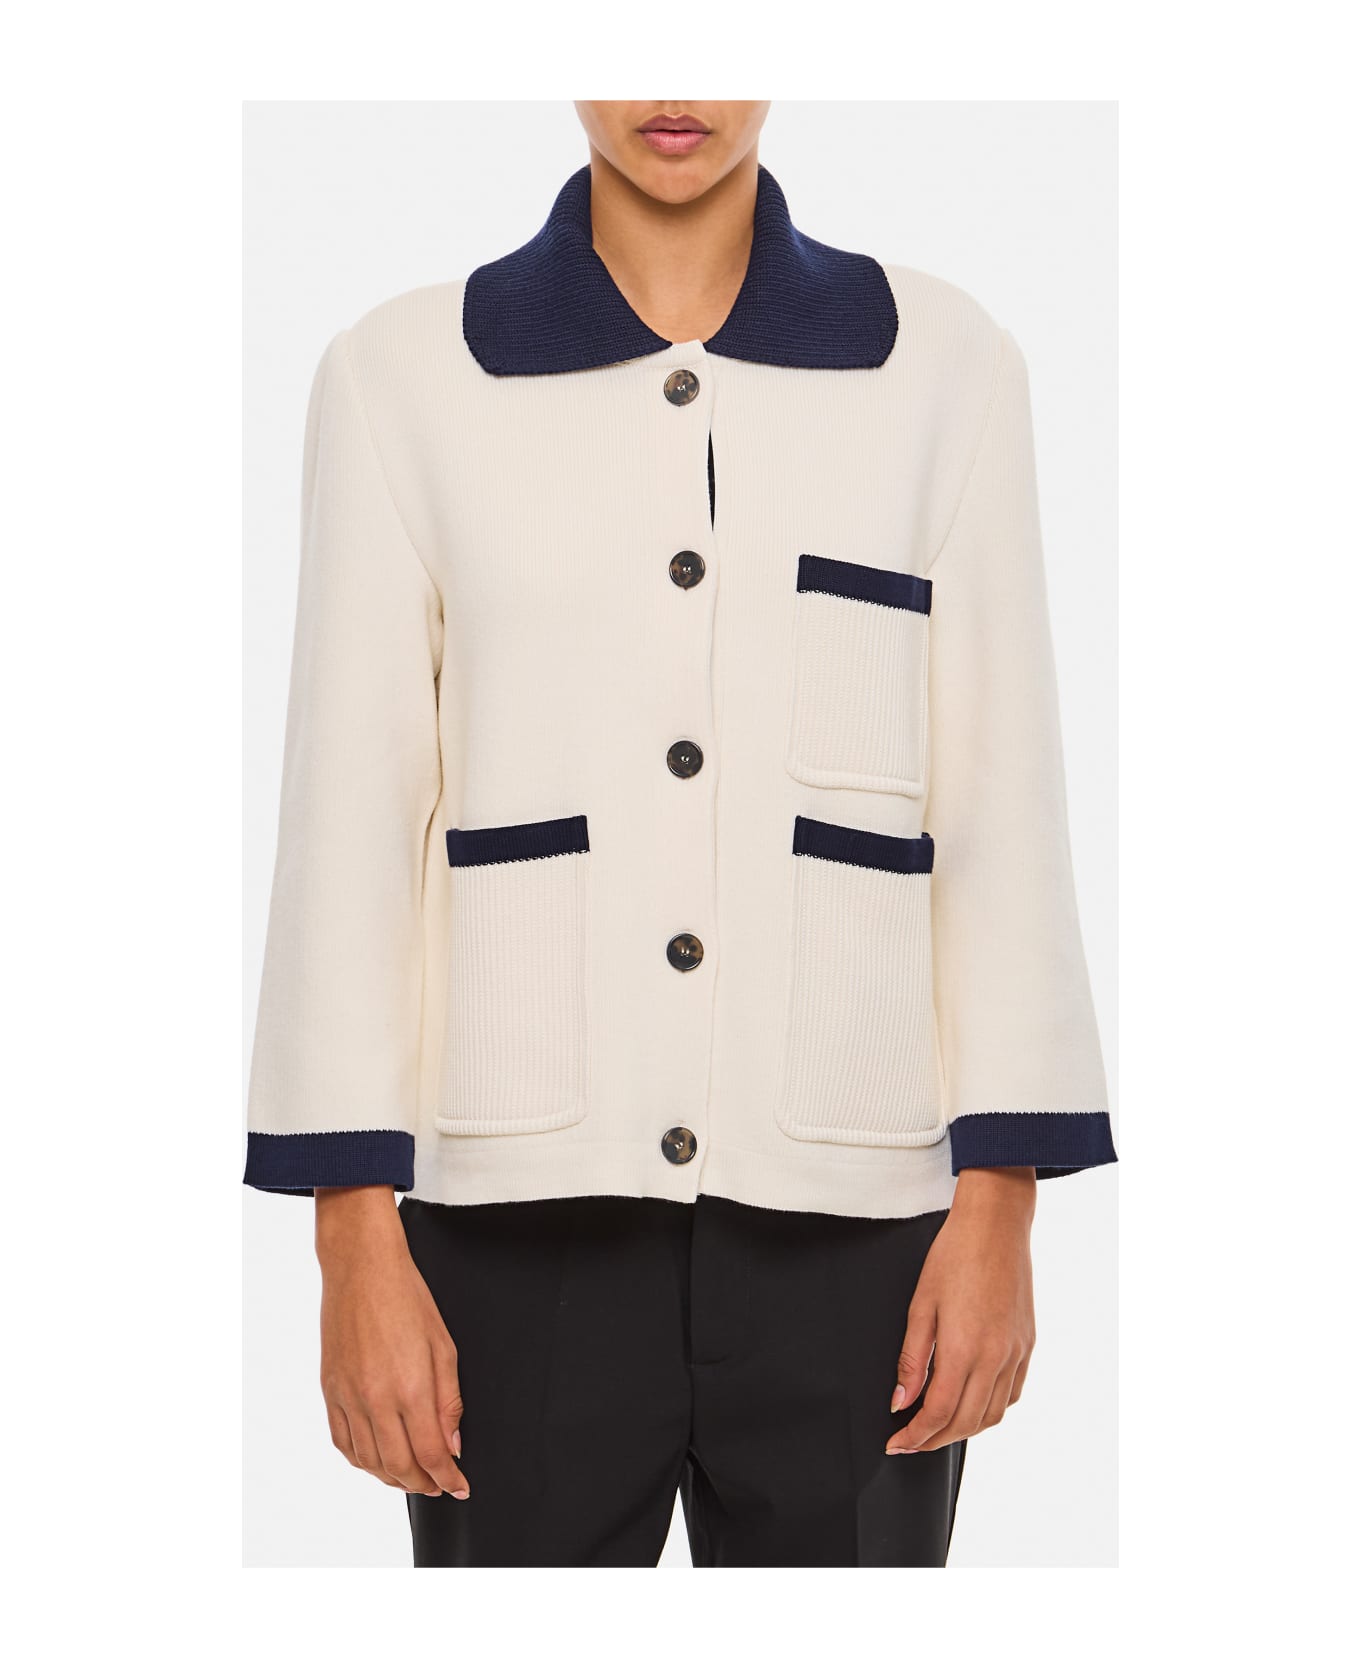 Thom Browne Polo Collar Cotton And Cashmere Jacket - White ブレザー